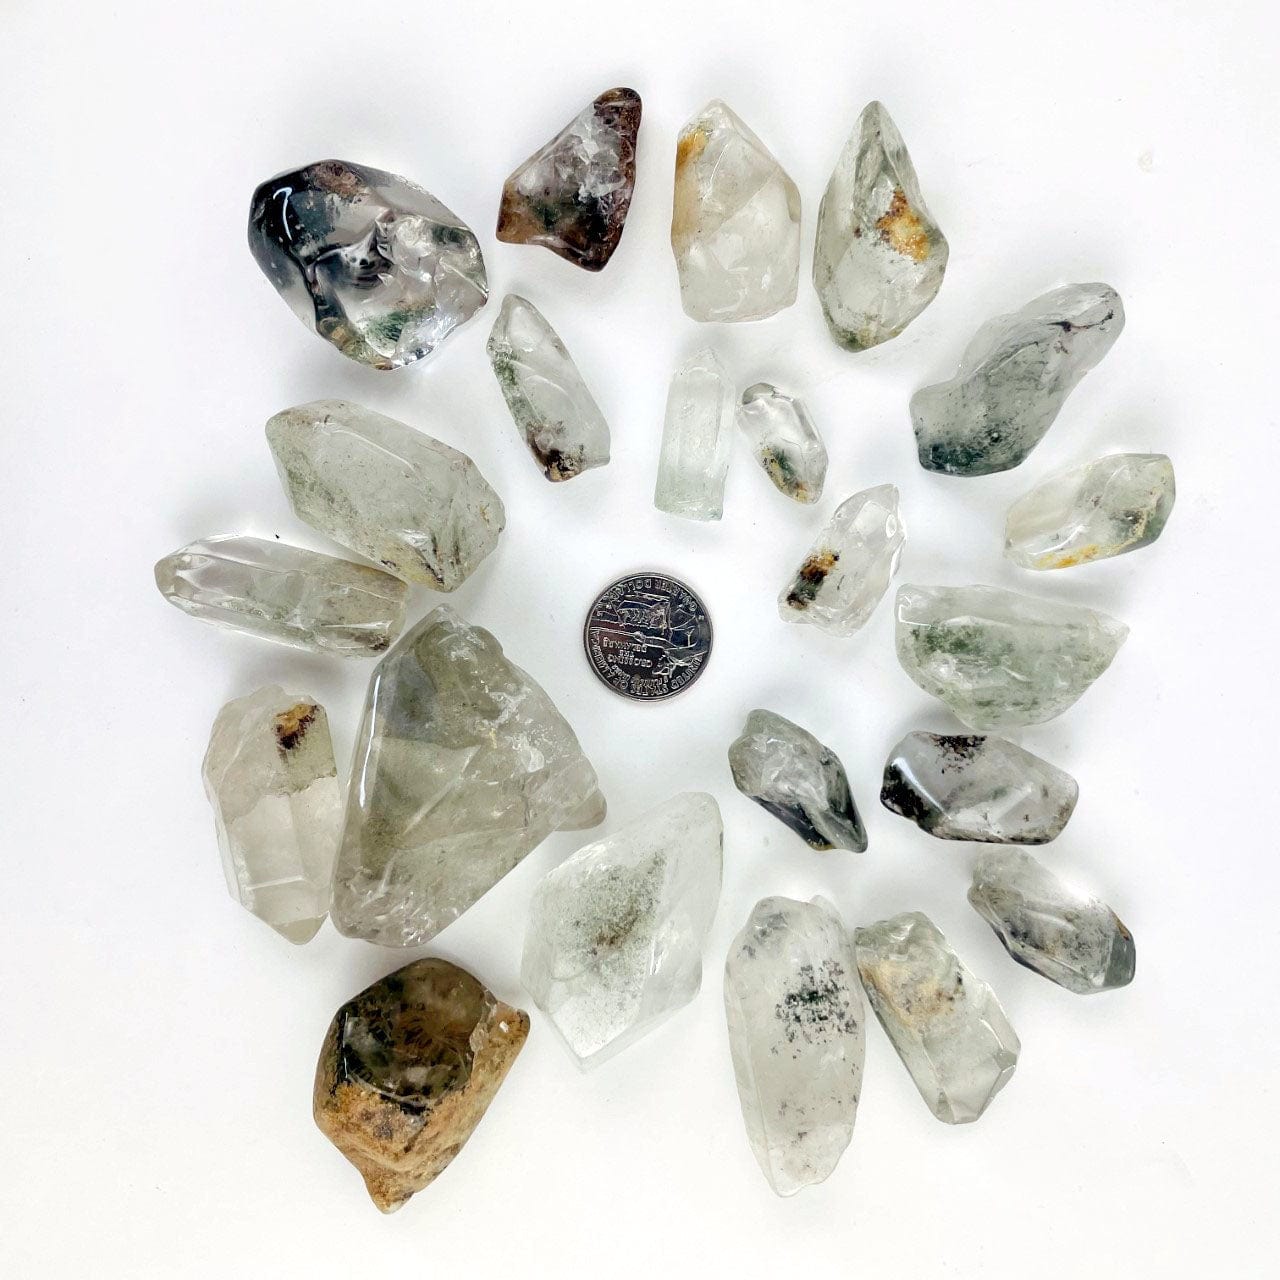 Polished Crystal Quartz Points with Chloride around a quarter for sizing